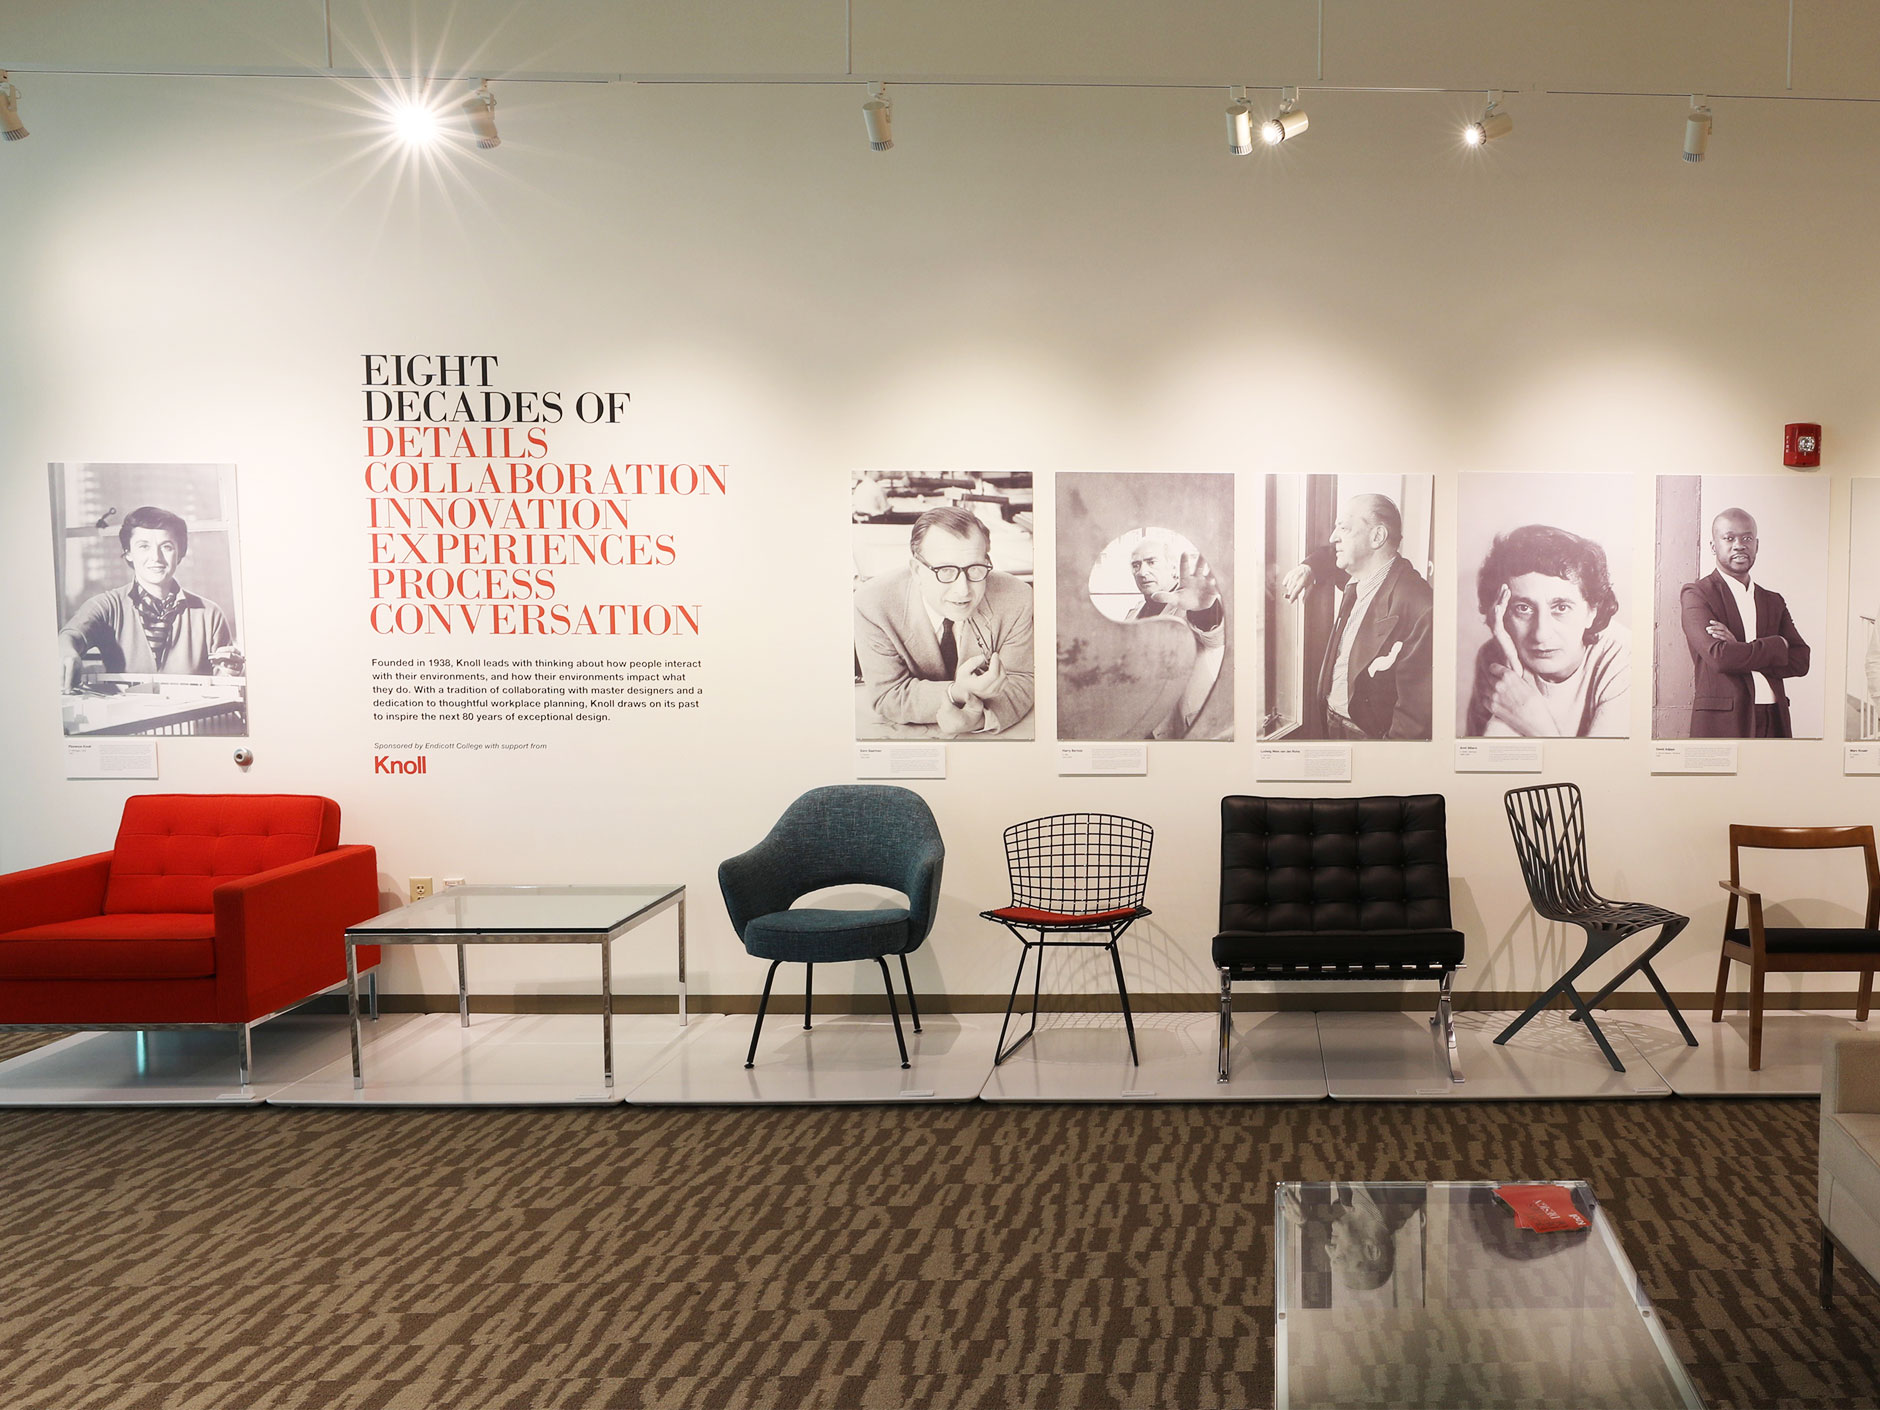 Image shows a line of chairs and images as part of the exhibit on Knoll furniture and design